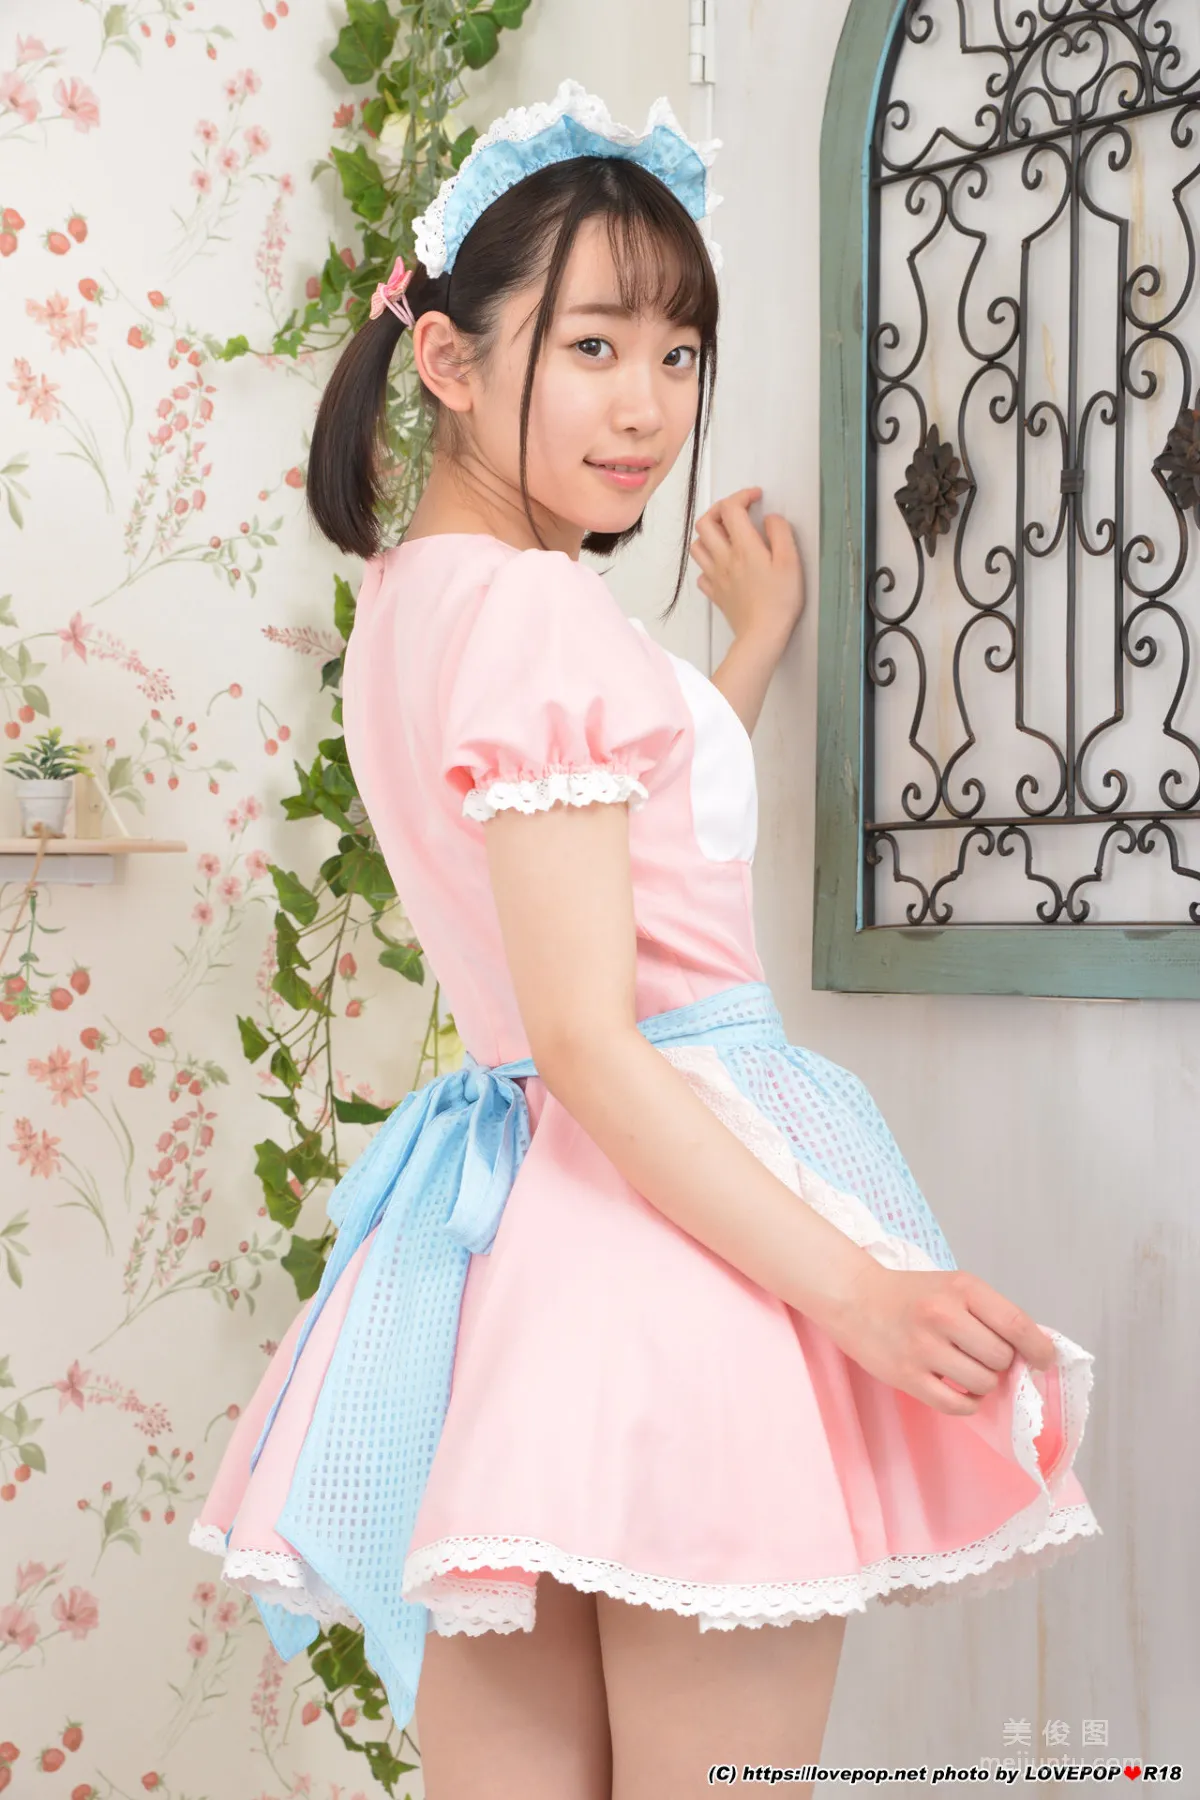 [LOVEPOP] Special Maid Collection - 架乃ゆら Photoset 048